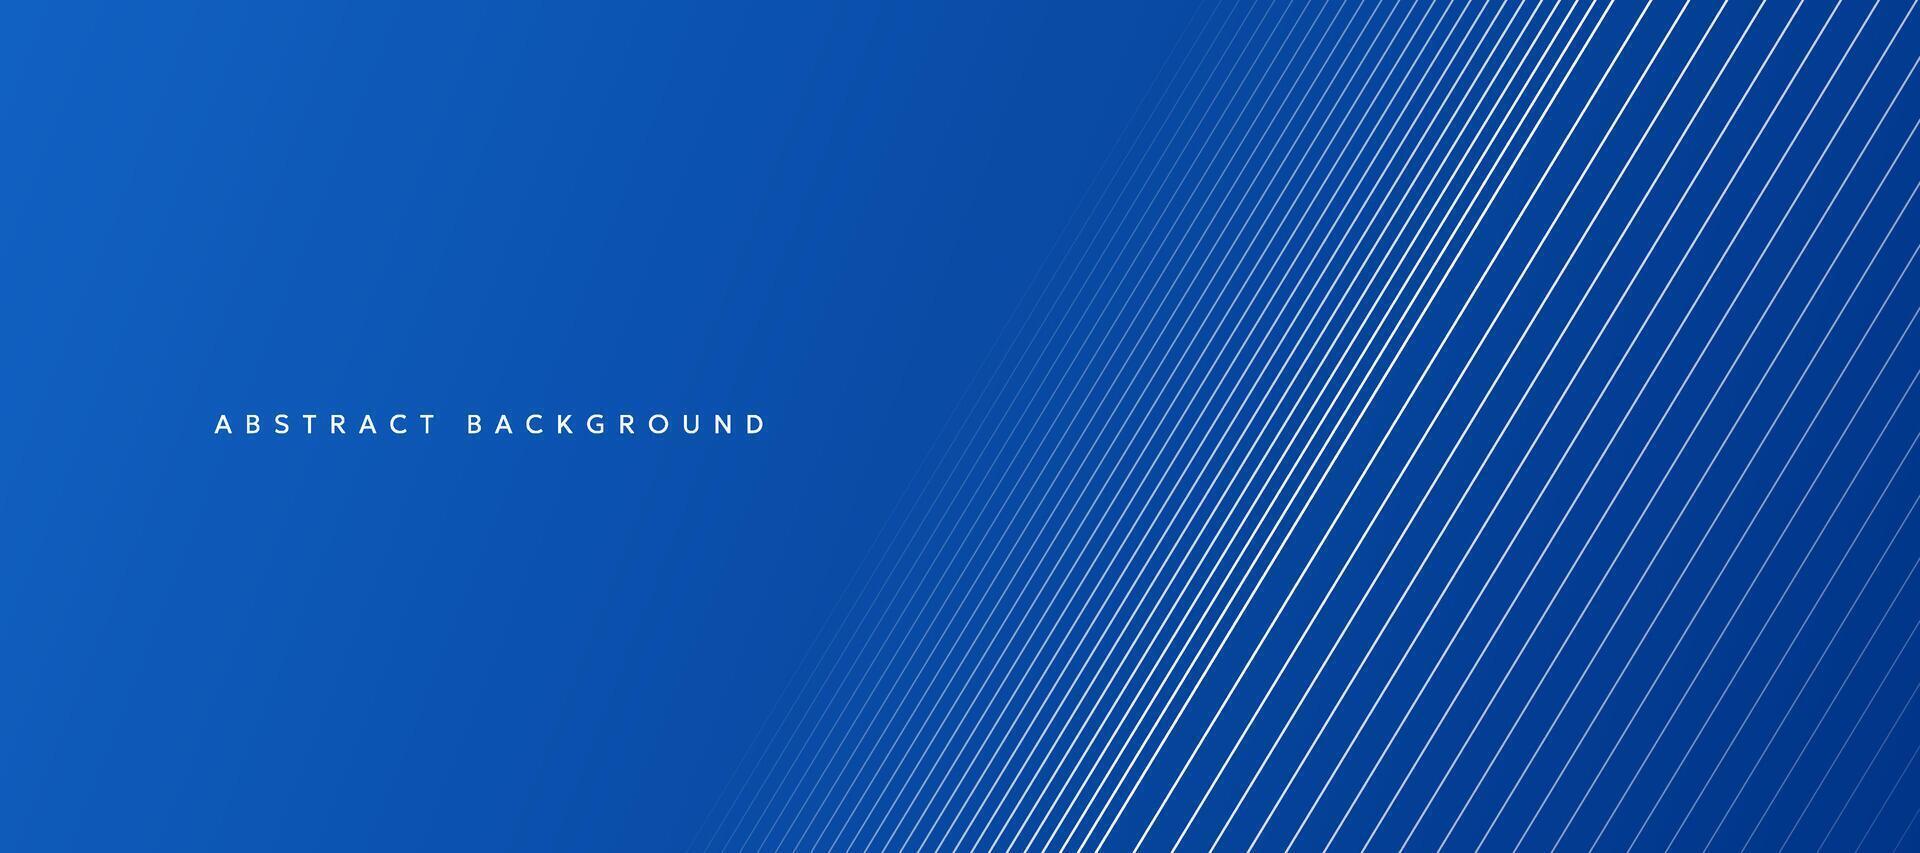 Blue background with straight lines vector